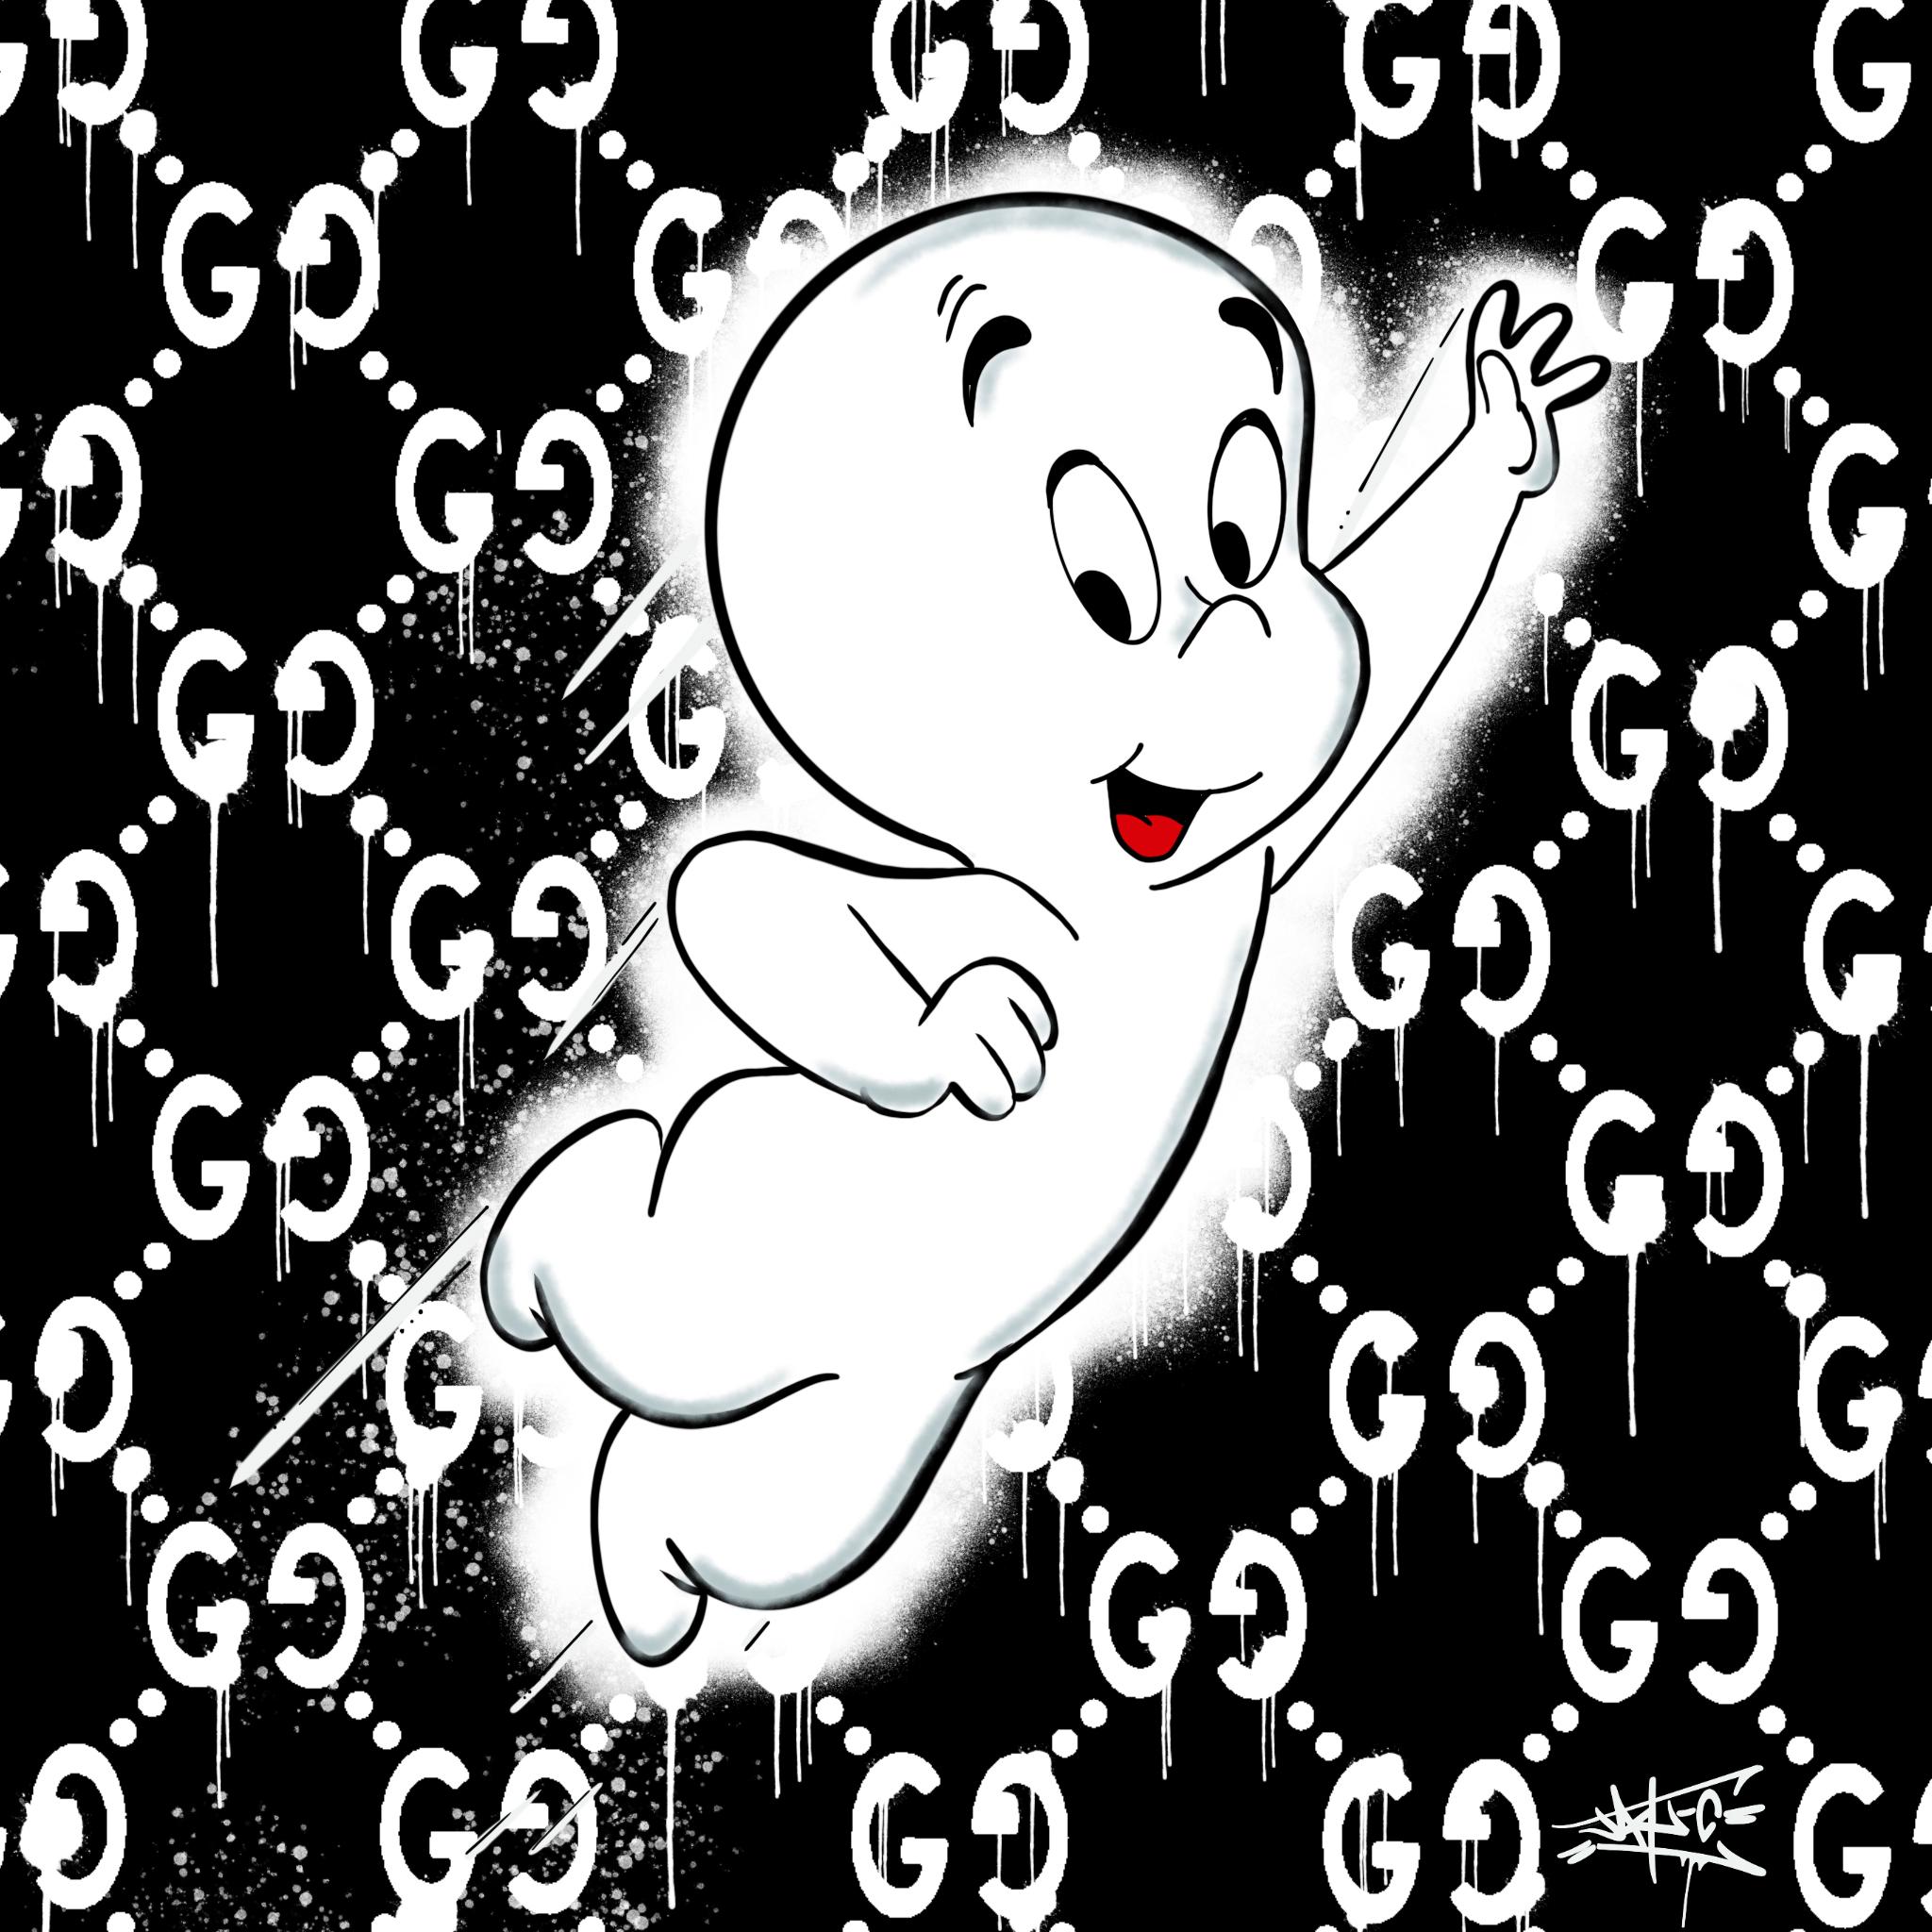 The real Gucci Ghost!